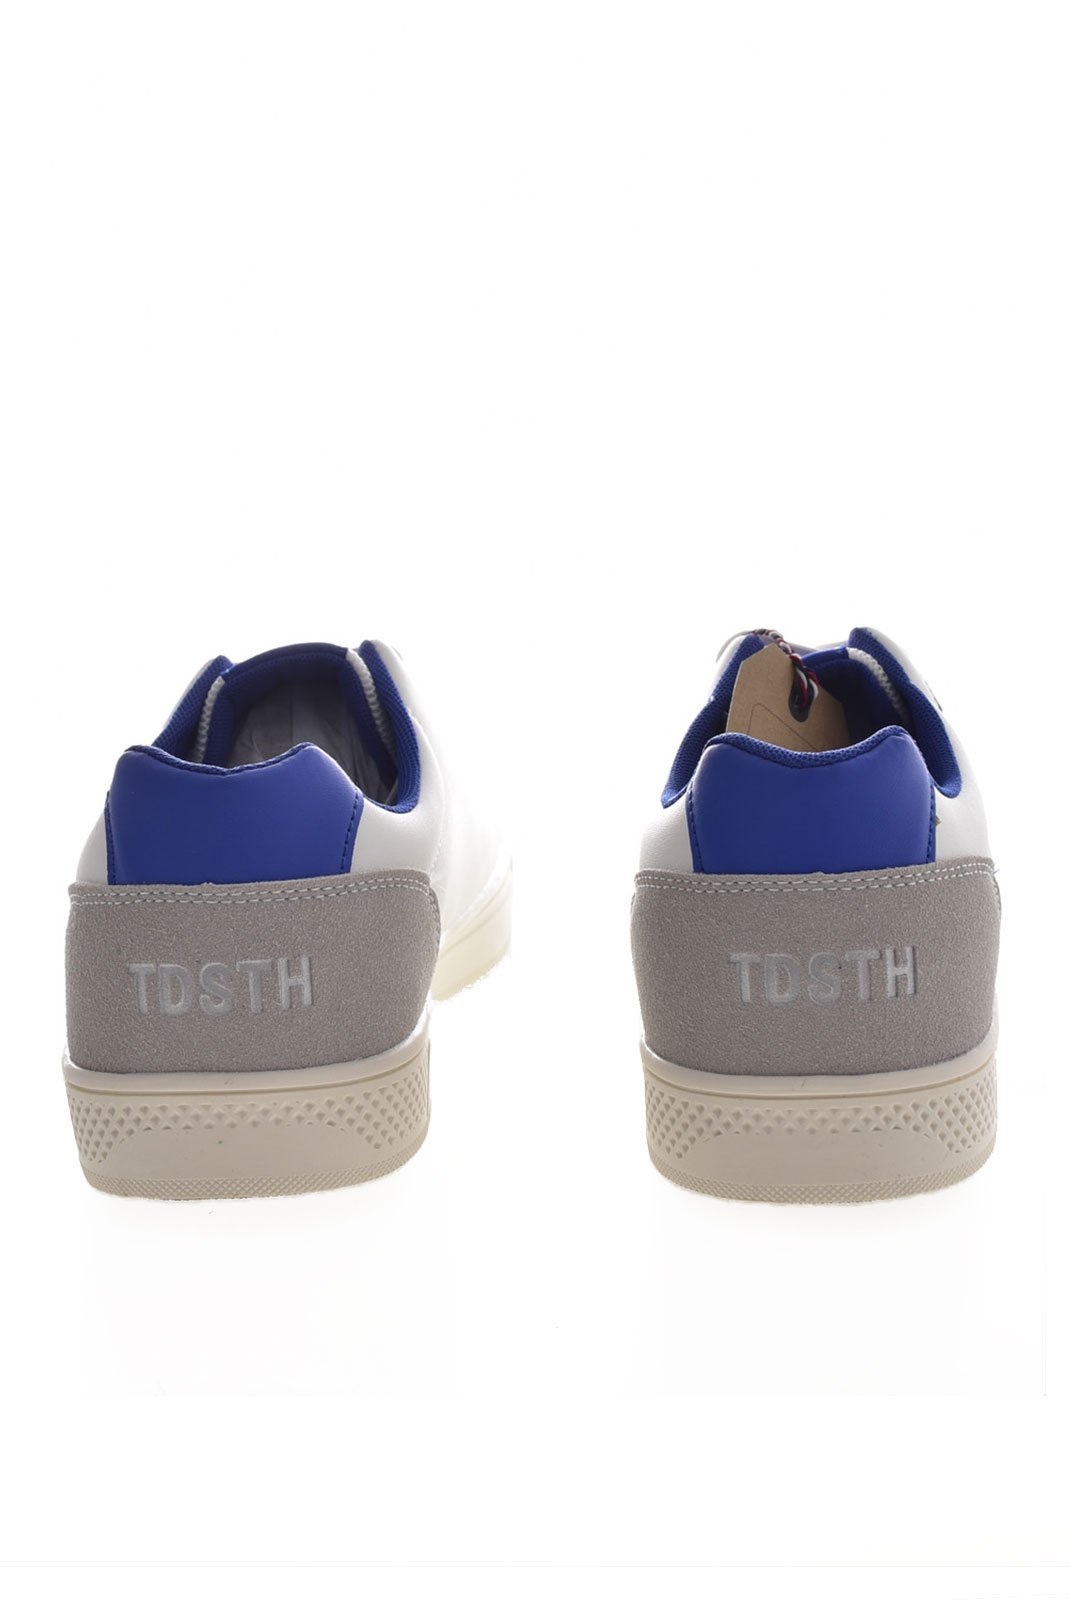 Chaussures   Teddy smith 71642 NAVY